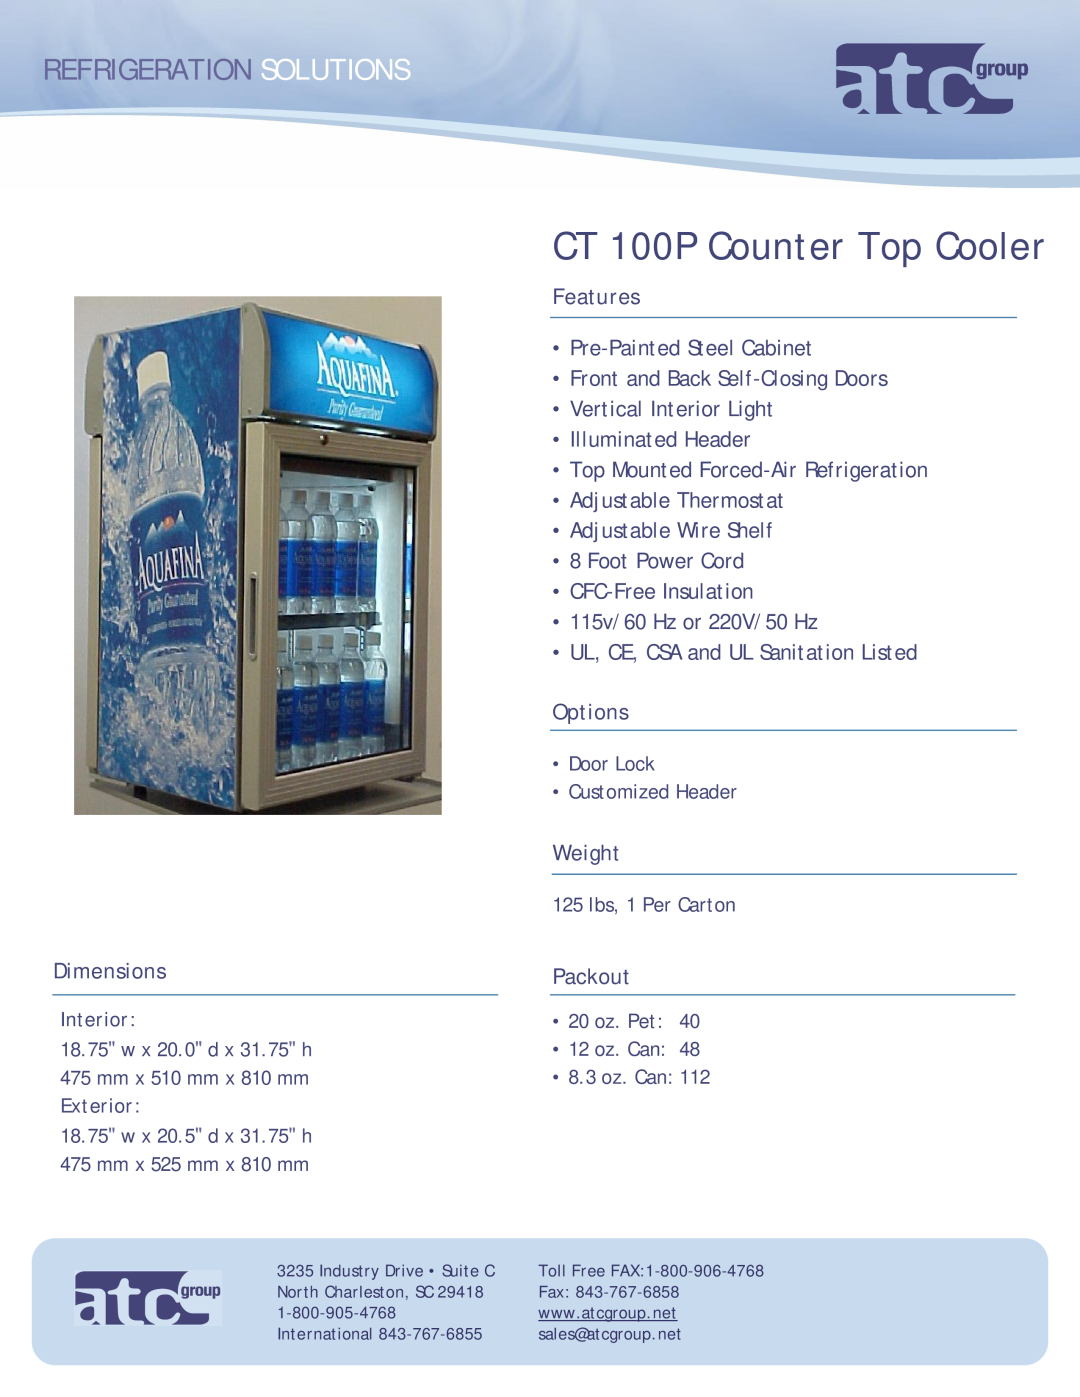 ATC Group dimensions CT 100P Counter Top Cooler, Refrigeration Solutions, Features, Options, Weight, Dimensions 